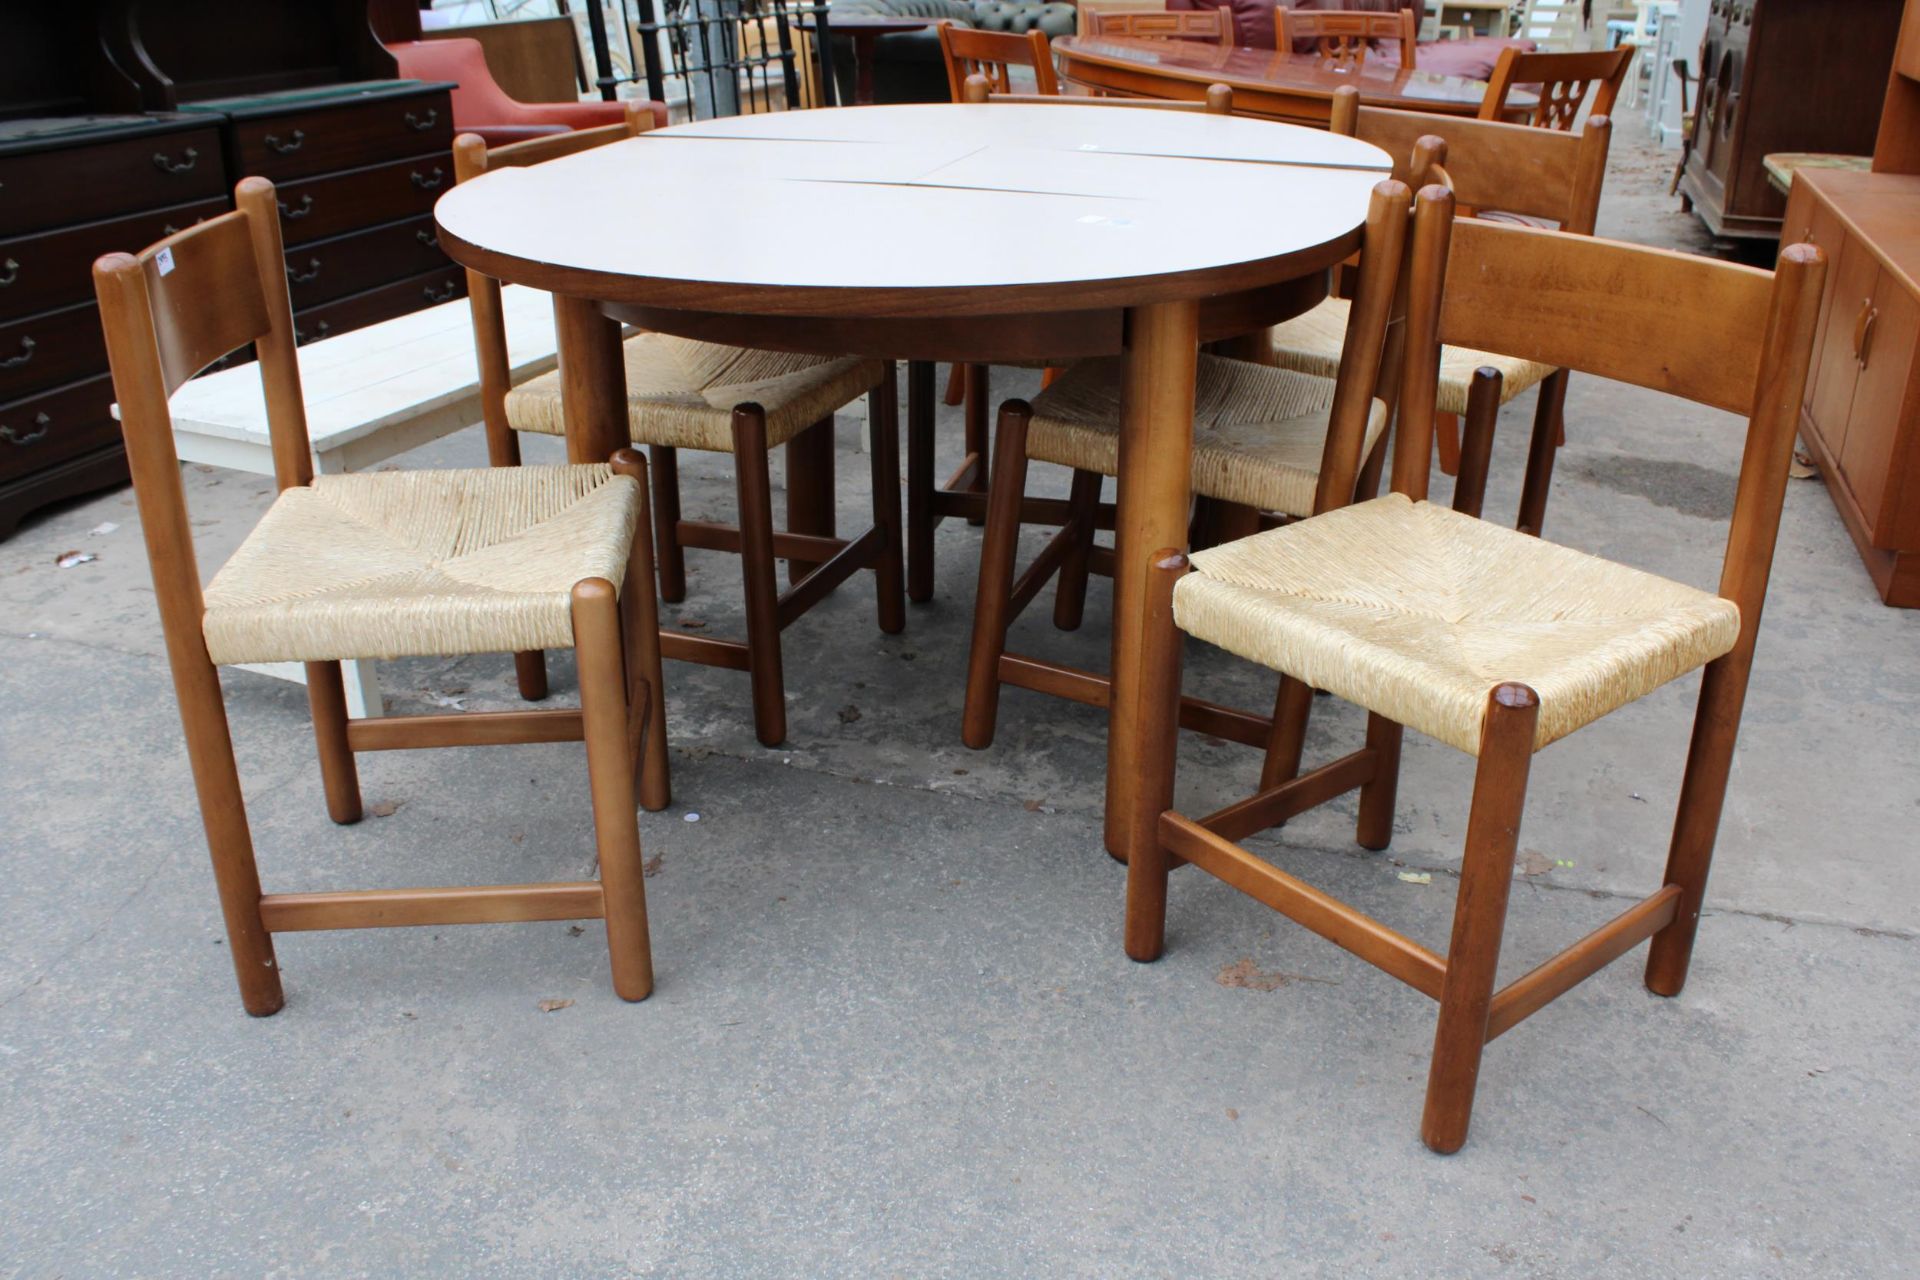 A CHARLOTTE PERRIAND STYLE DINING TABLE 43" DIAMETER (LEAF14") AND SIX MERIBEL STYLE DINING CHAIRS - Image 3 of 3